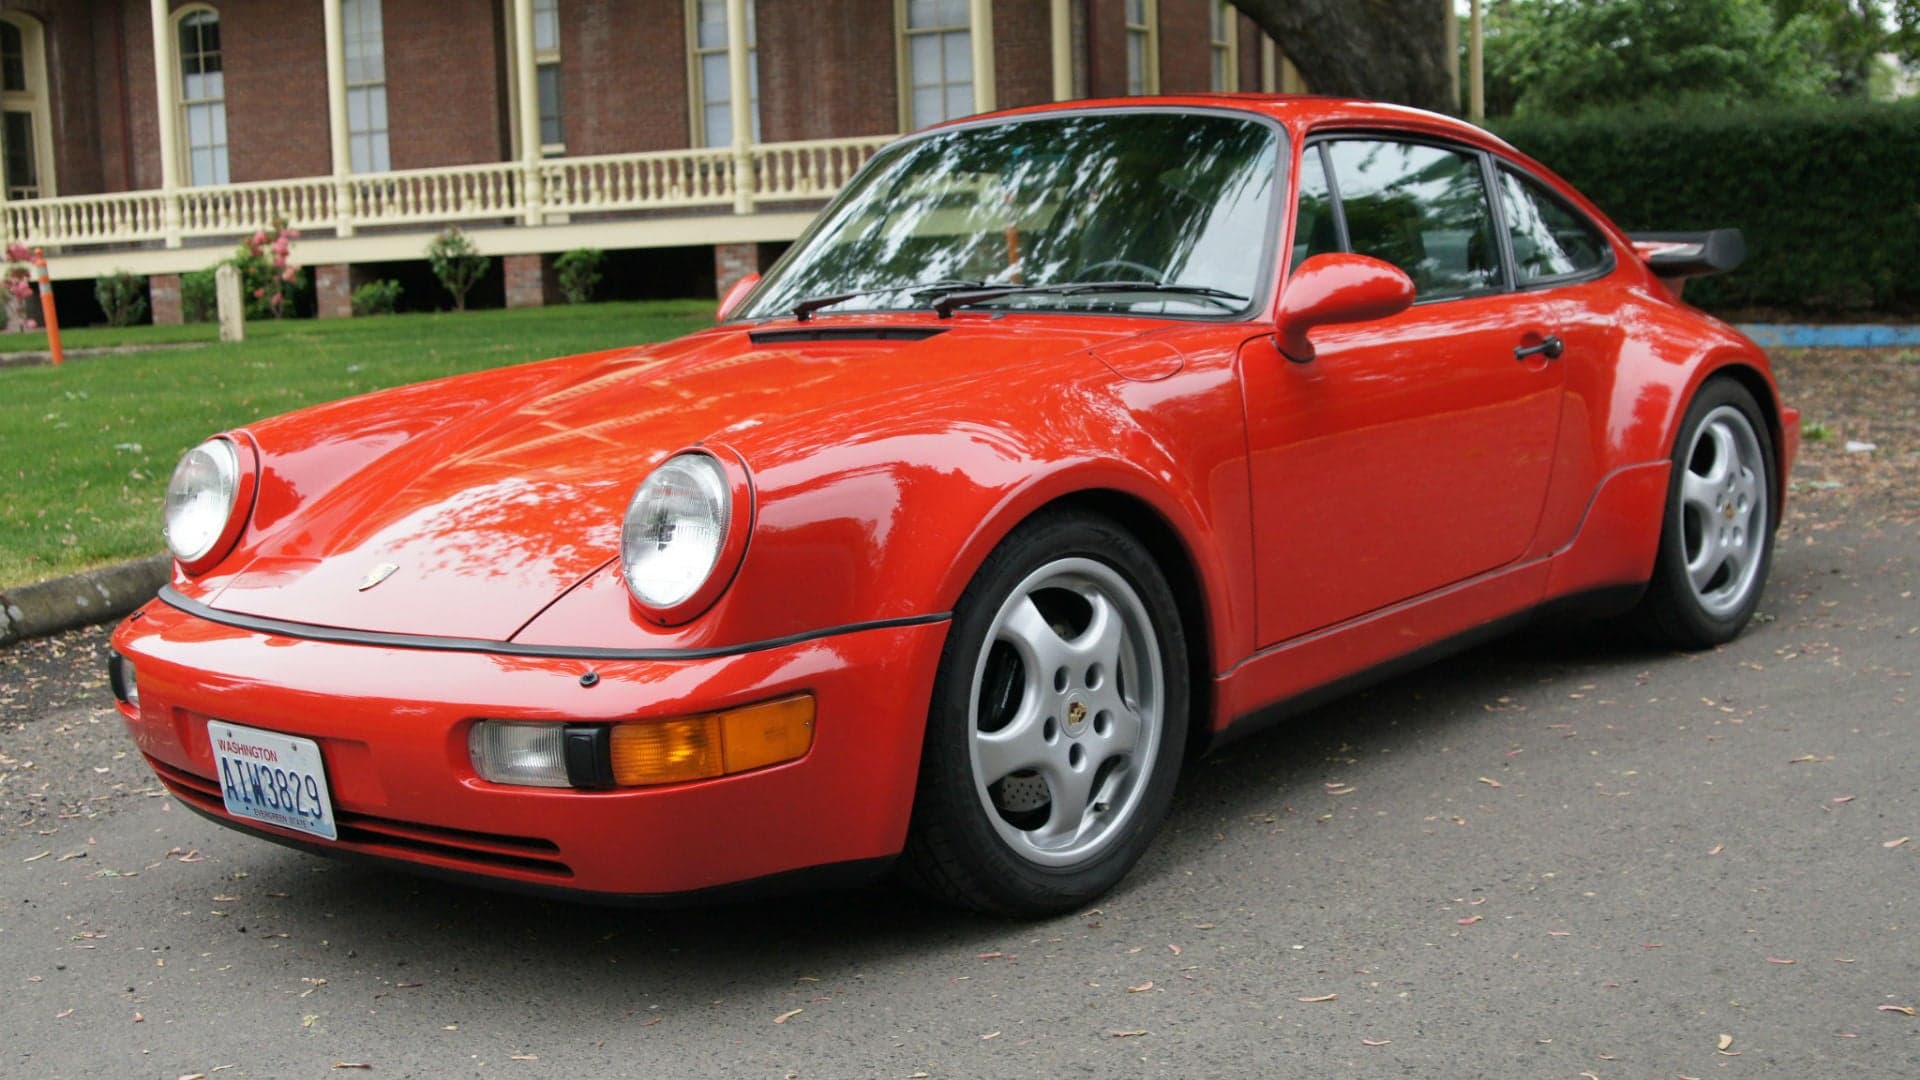 This 1992 Porsche 964 Turbo S2 Homologation Special is Rarer than it Looks